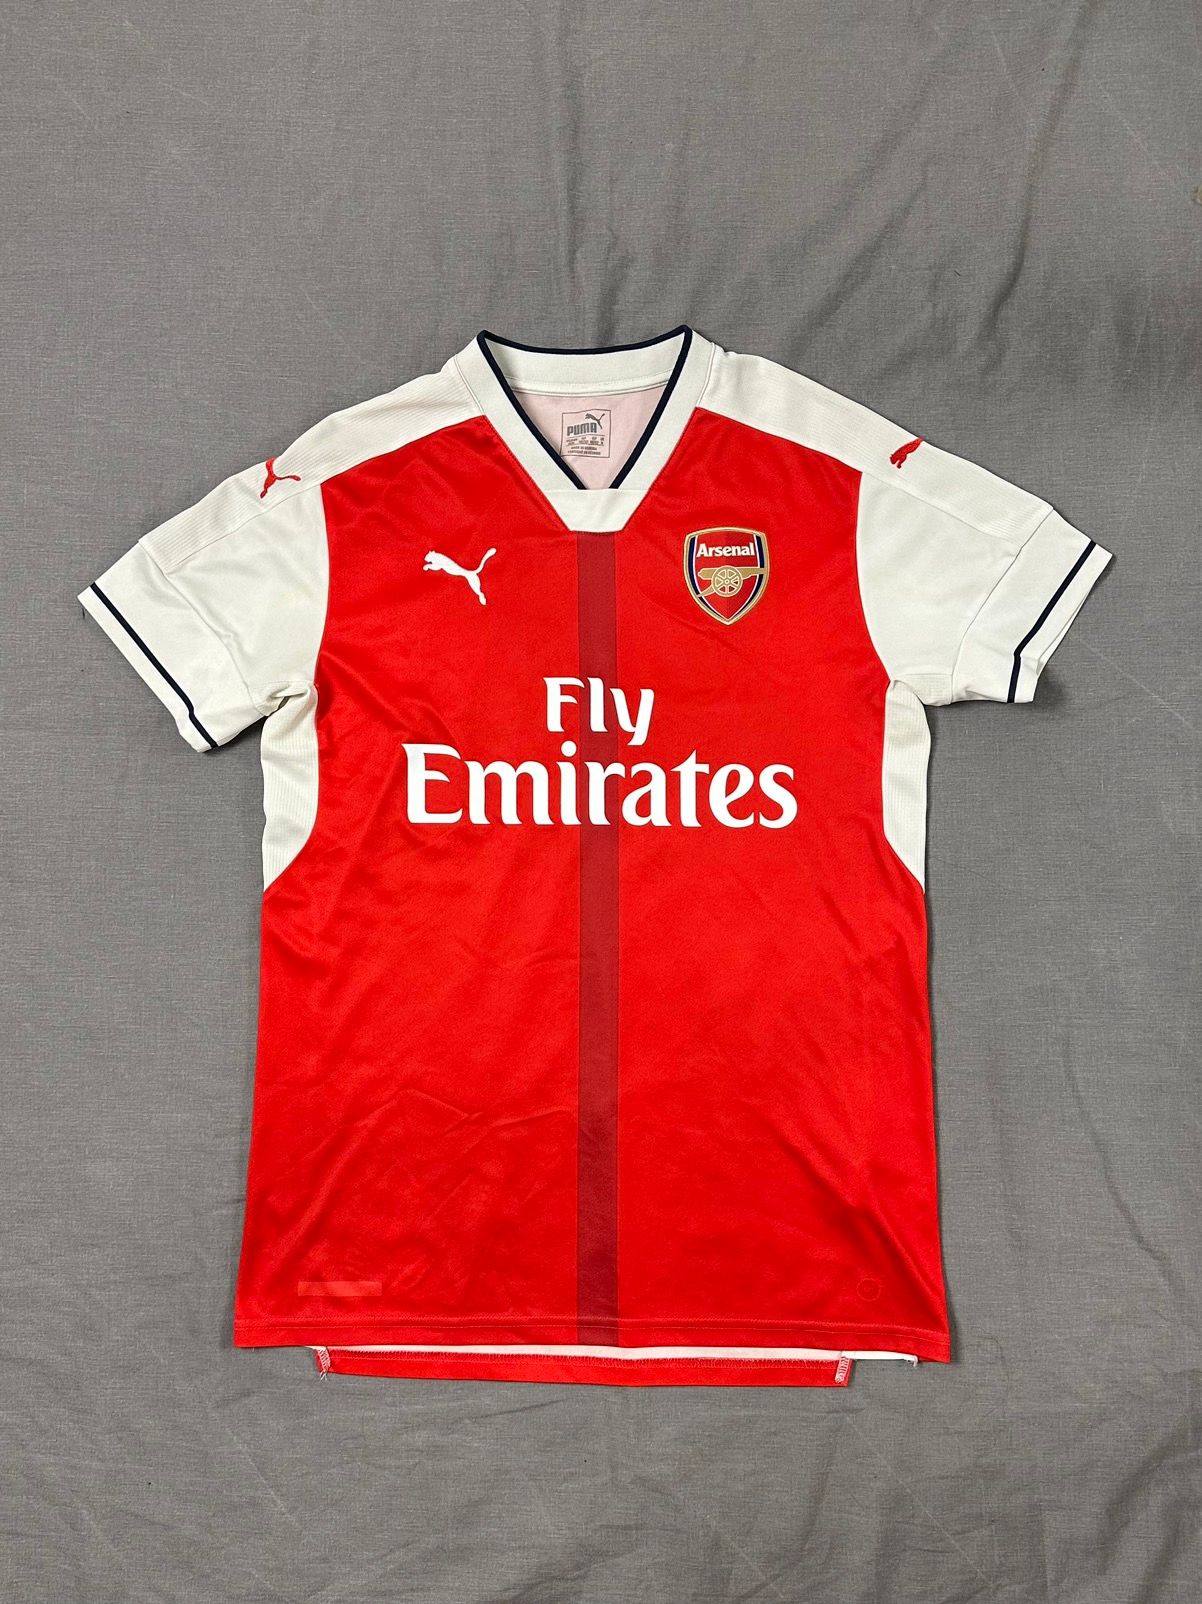 Pre-owned Puma X Soccer Jersey Puma Arsenal Fly Emirates Red White Soccer Jersey Size M